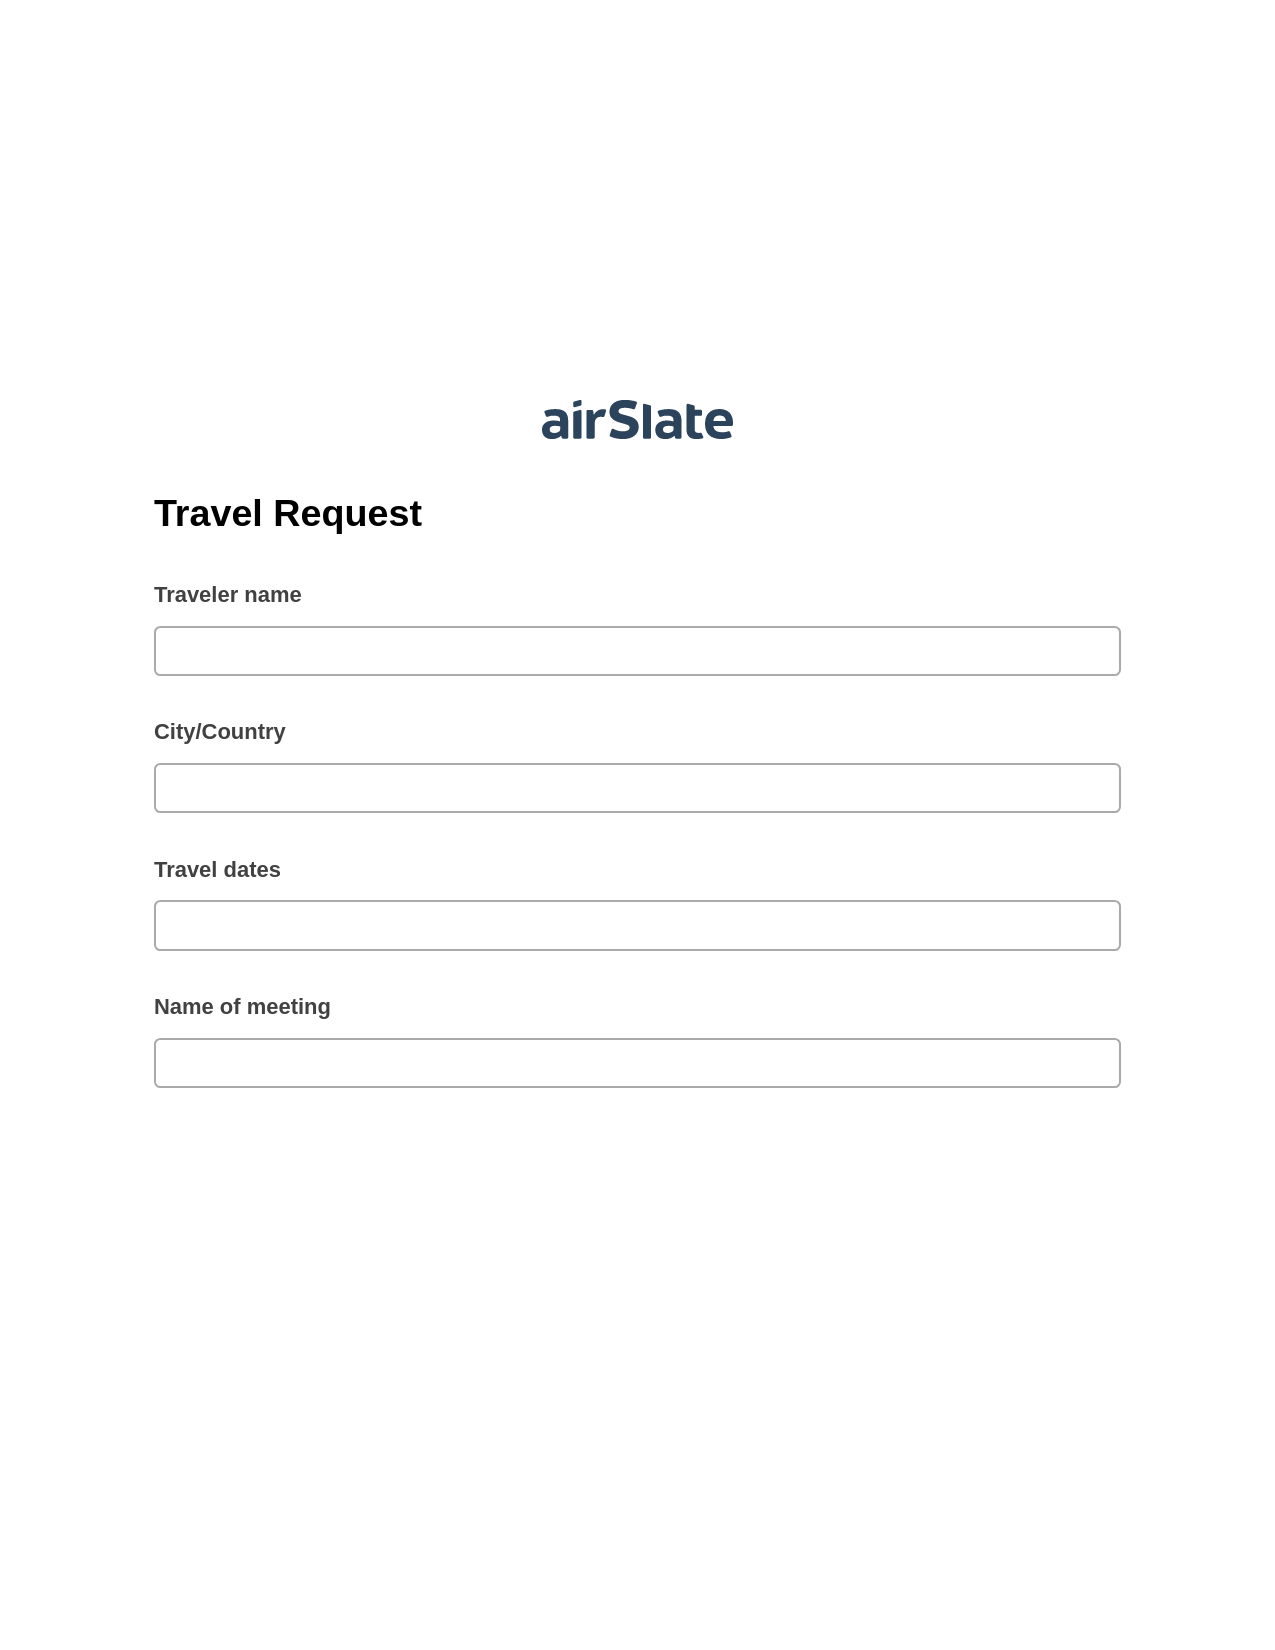 Travel Request Pre-fill Slate from MS Dynamics 365 Records Bot, Create MS Dynamics 365 Records Bot, Dropbox Bot